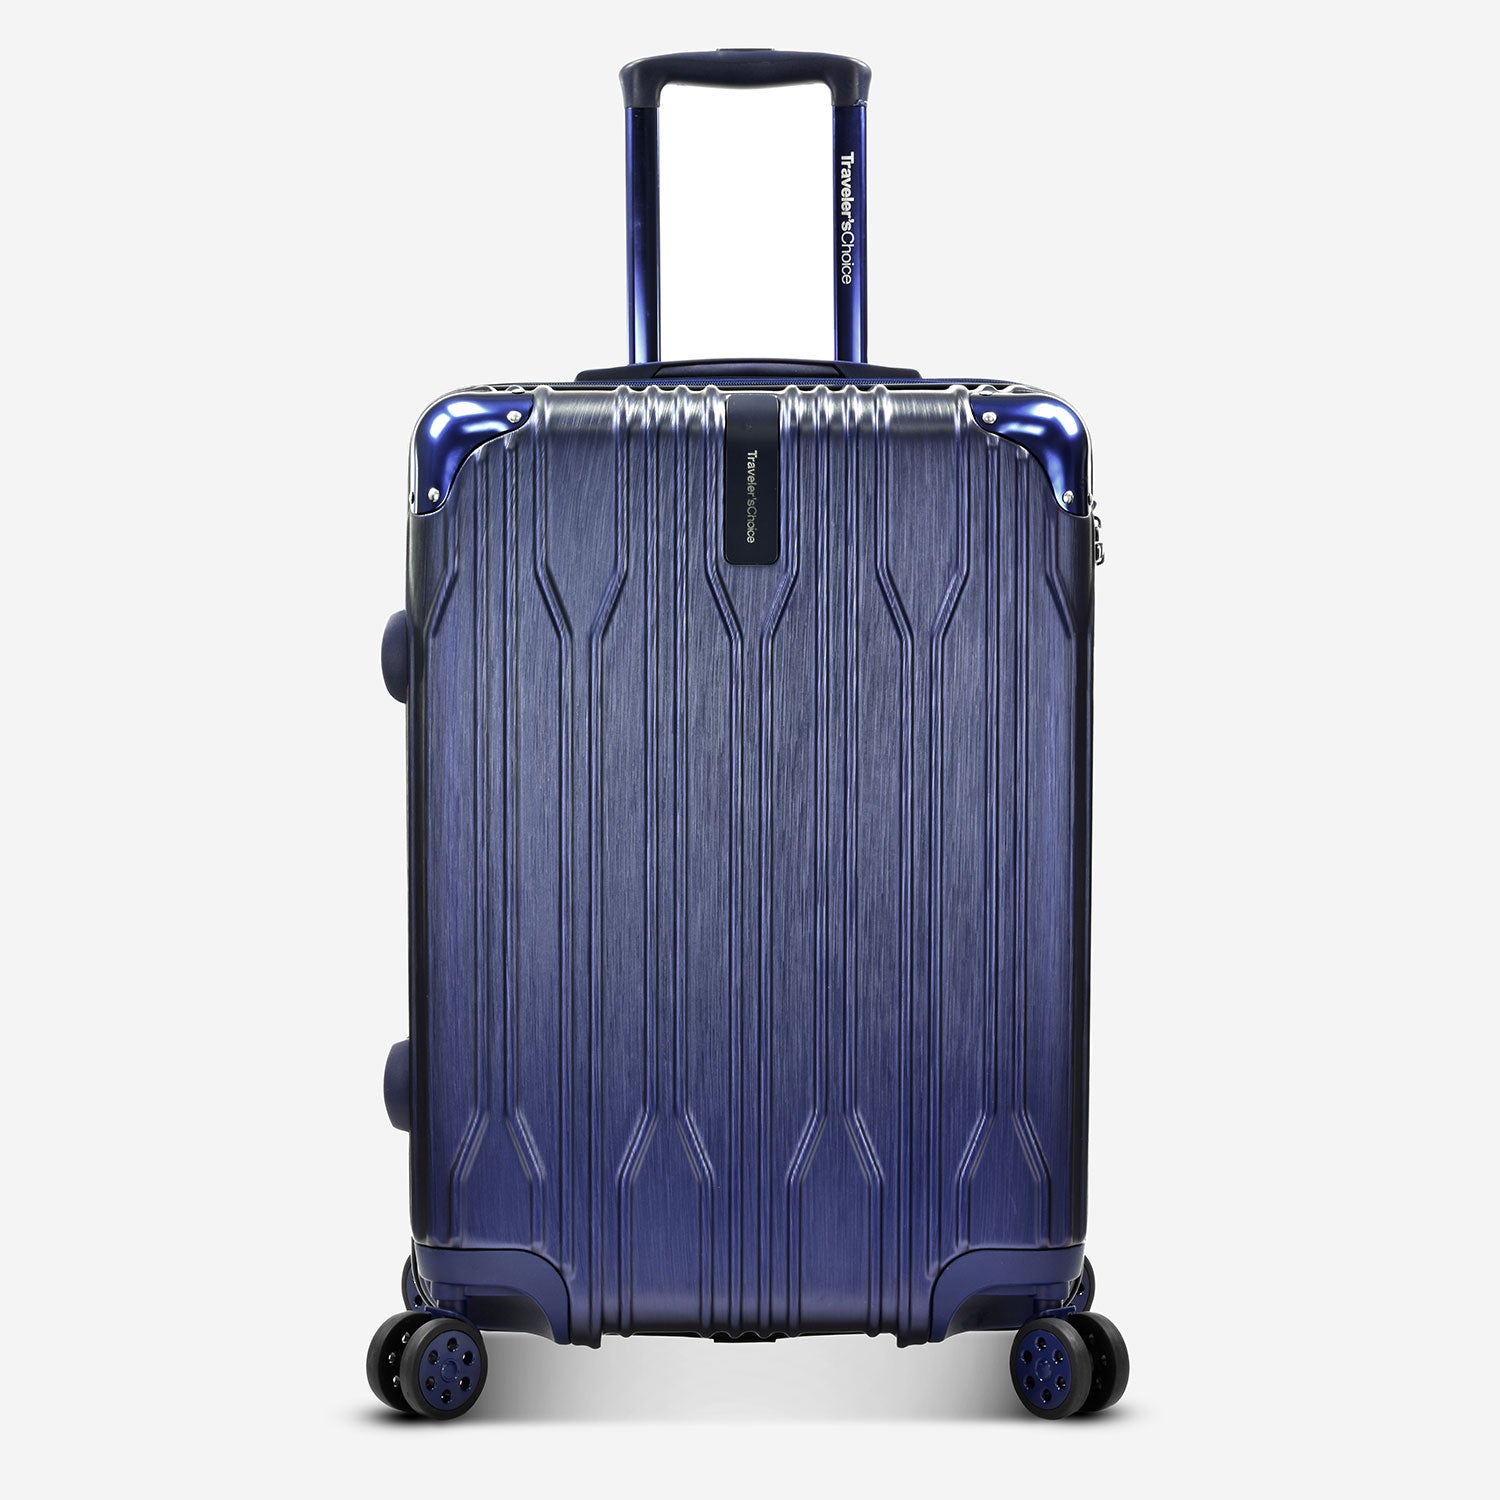 Bell Weather Medium Checked Luggage Suitcase with 4 Spinner Wheels